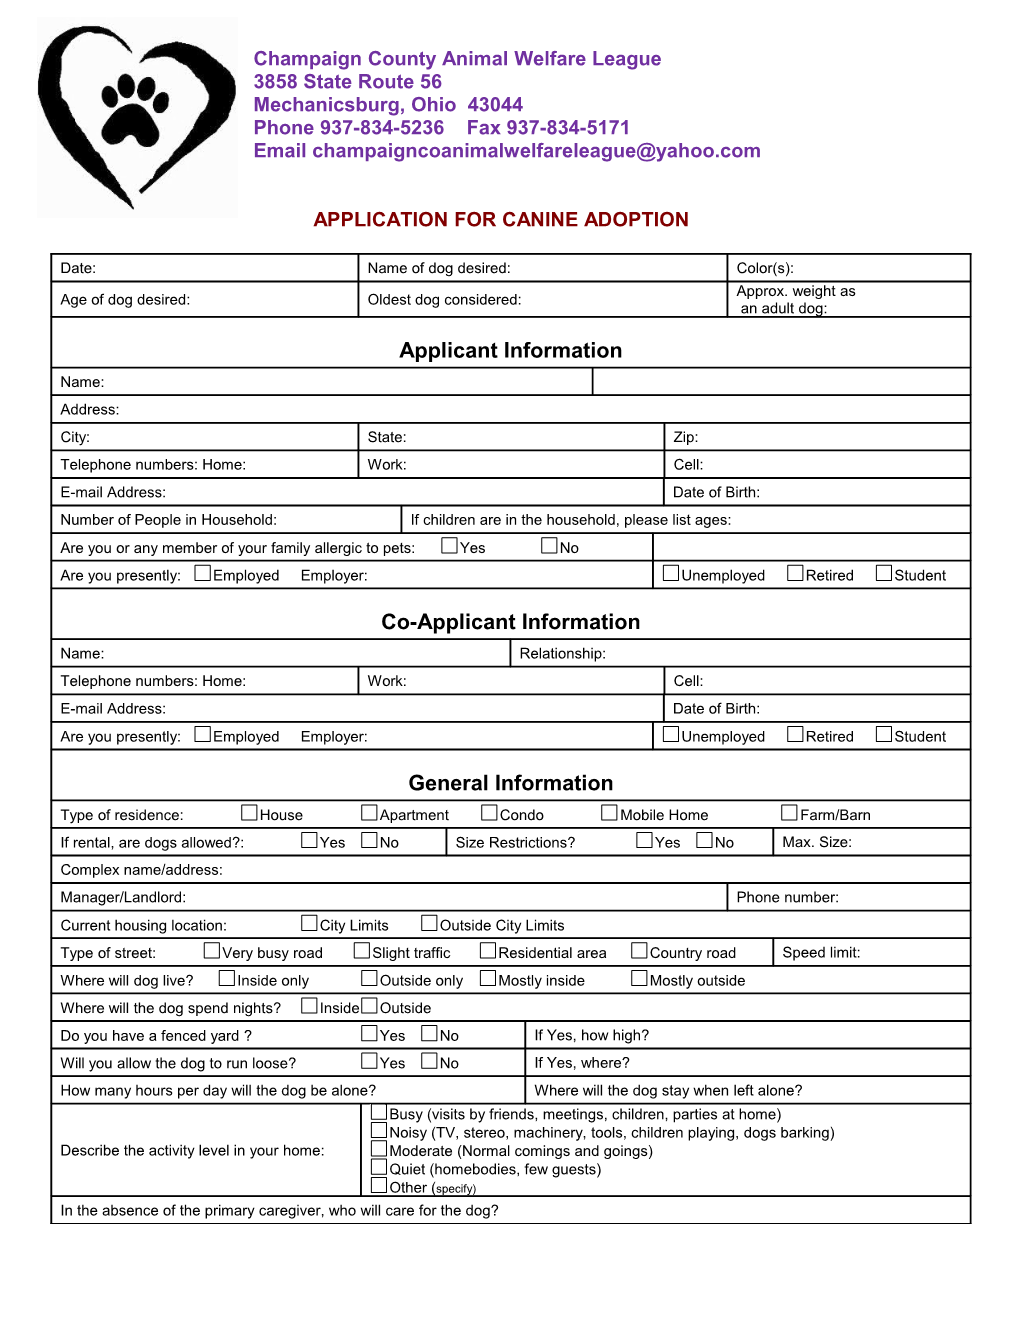 Application for Canine Adoption